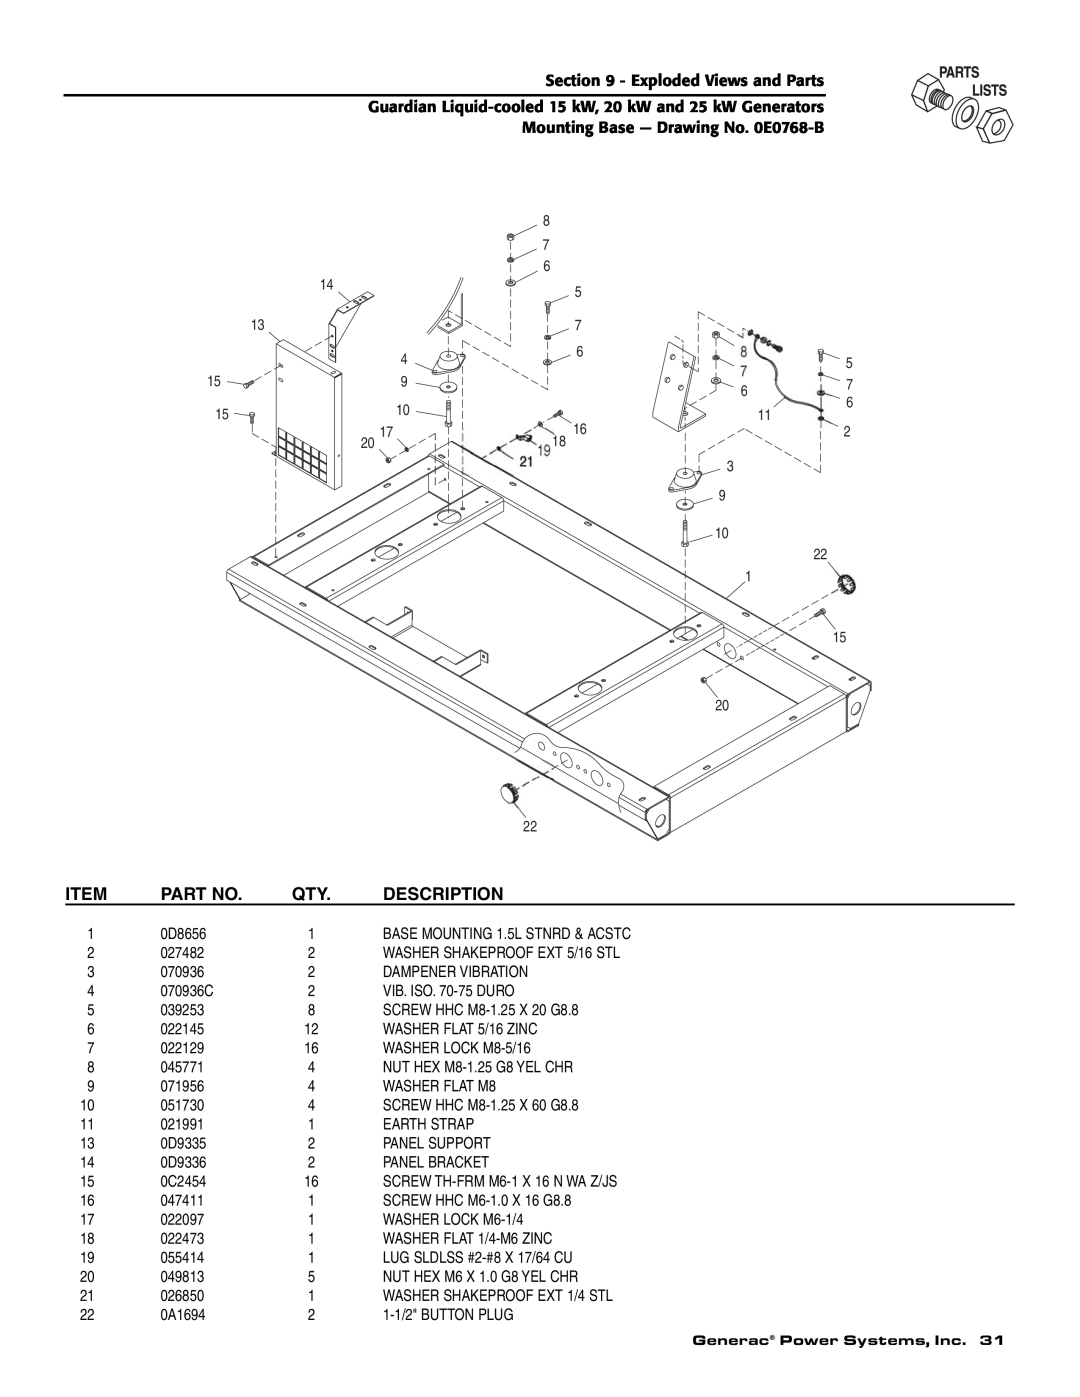 Guardian Technologies 004725-1, 004725-3 Description, Exploded Views and Parts, Mounting Base - Drawing No. 0E0768-B 